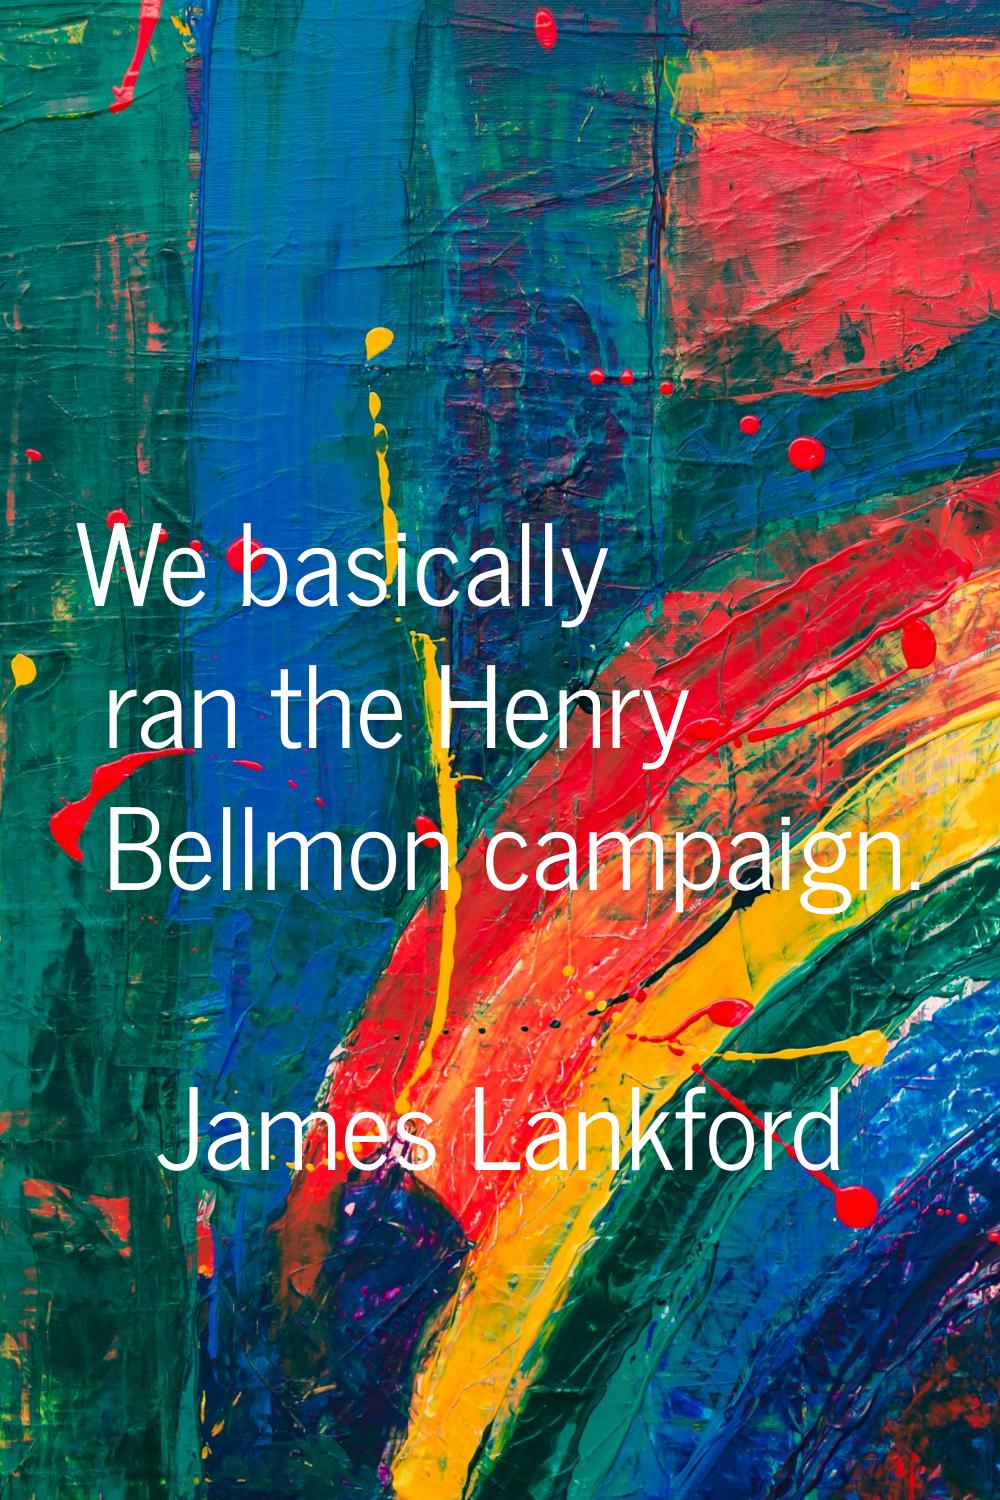 We basically ran the Henry Bellmon campaign.